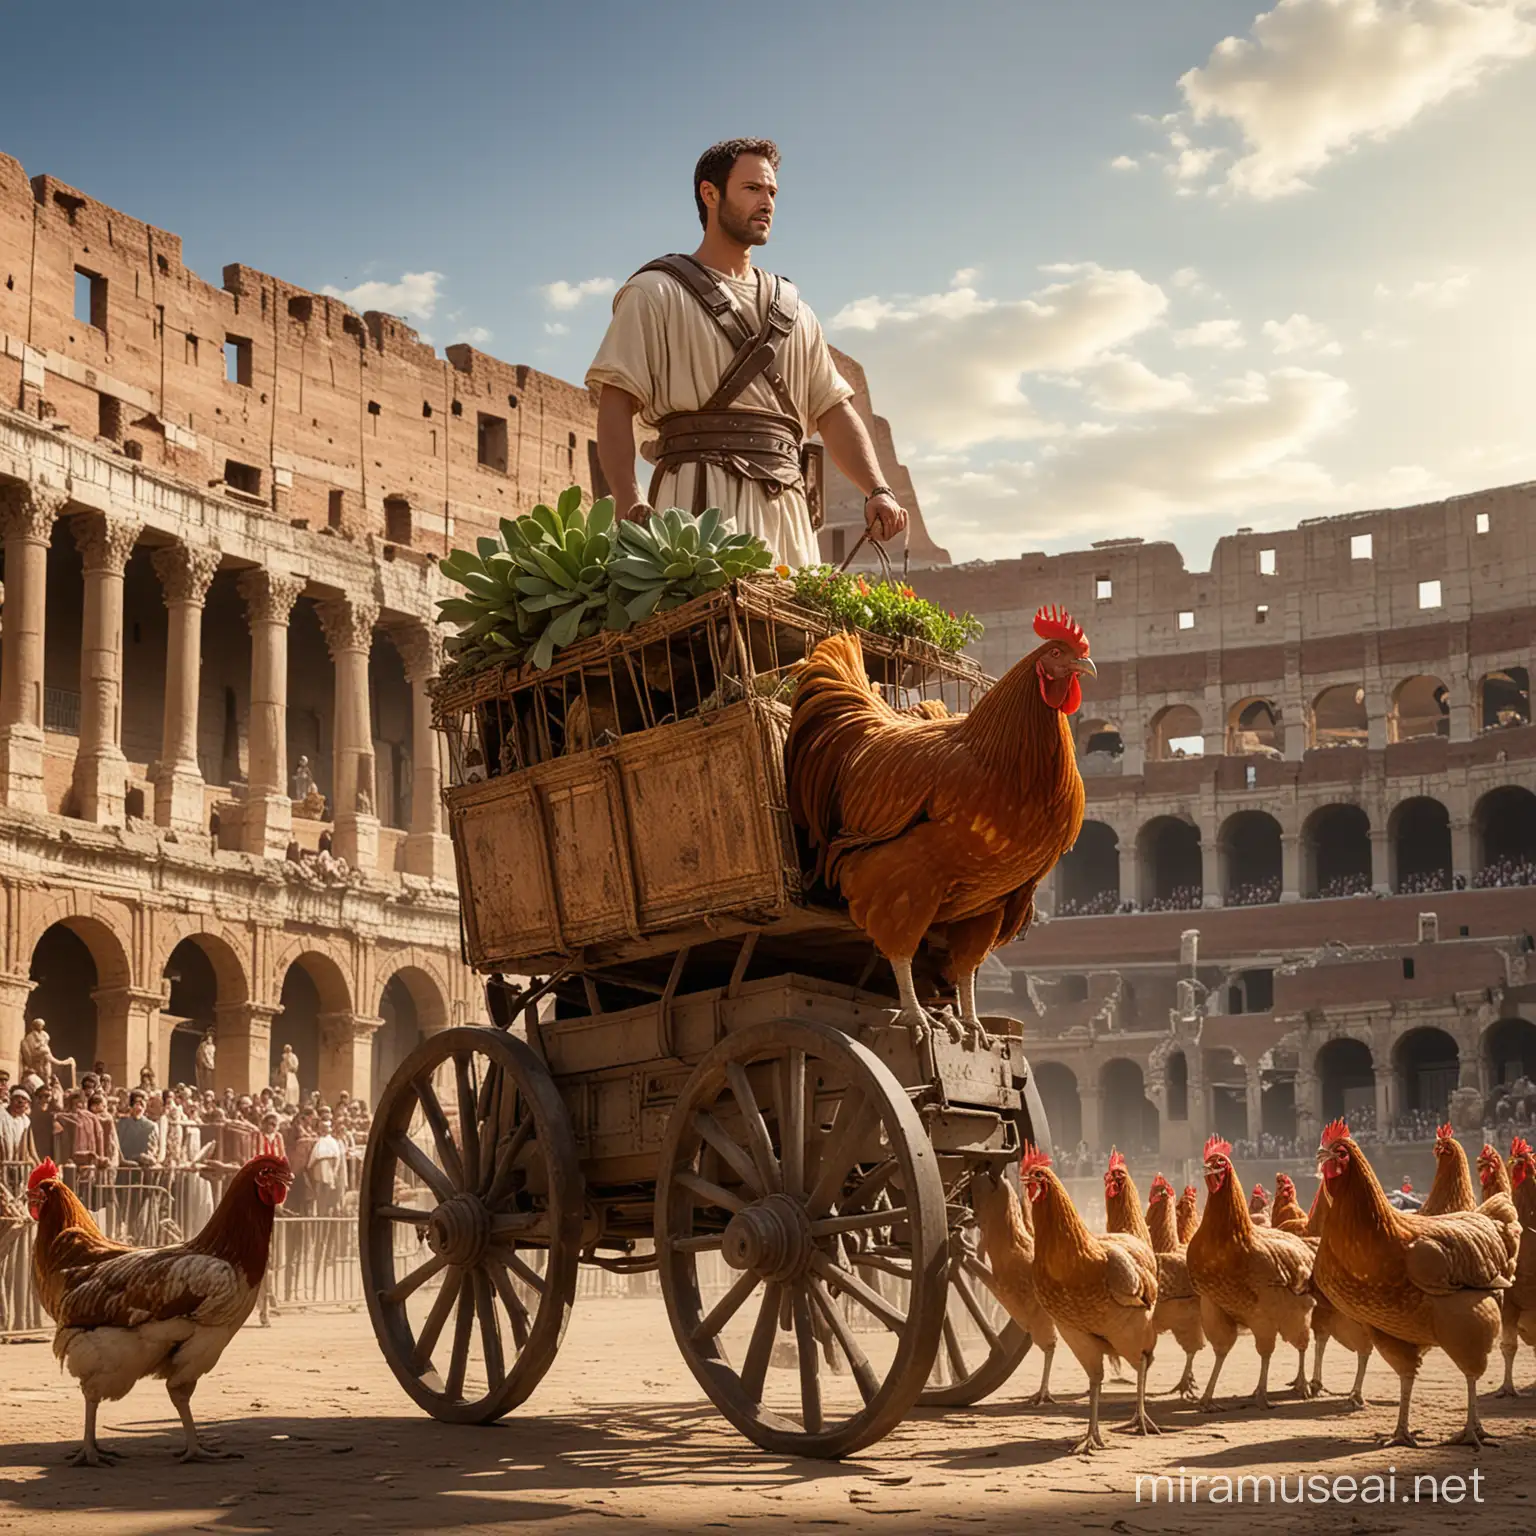 Imagine a scene in the ancient Roman Coliseum: Ben-Hur stands proudly on a chariot, being pulled by giant chickens. He holds a succulent rotisserie chicken. The grandeur of the Coliseum surrounds this unique and intriguing spectacle."